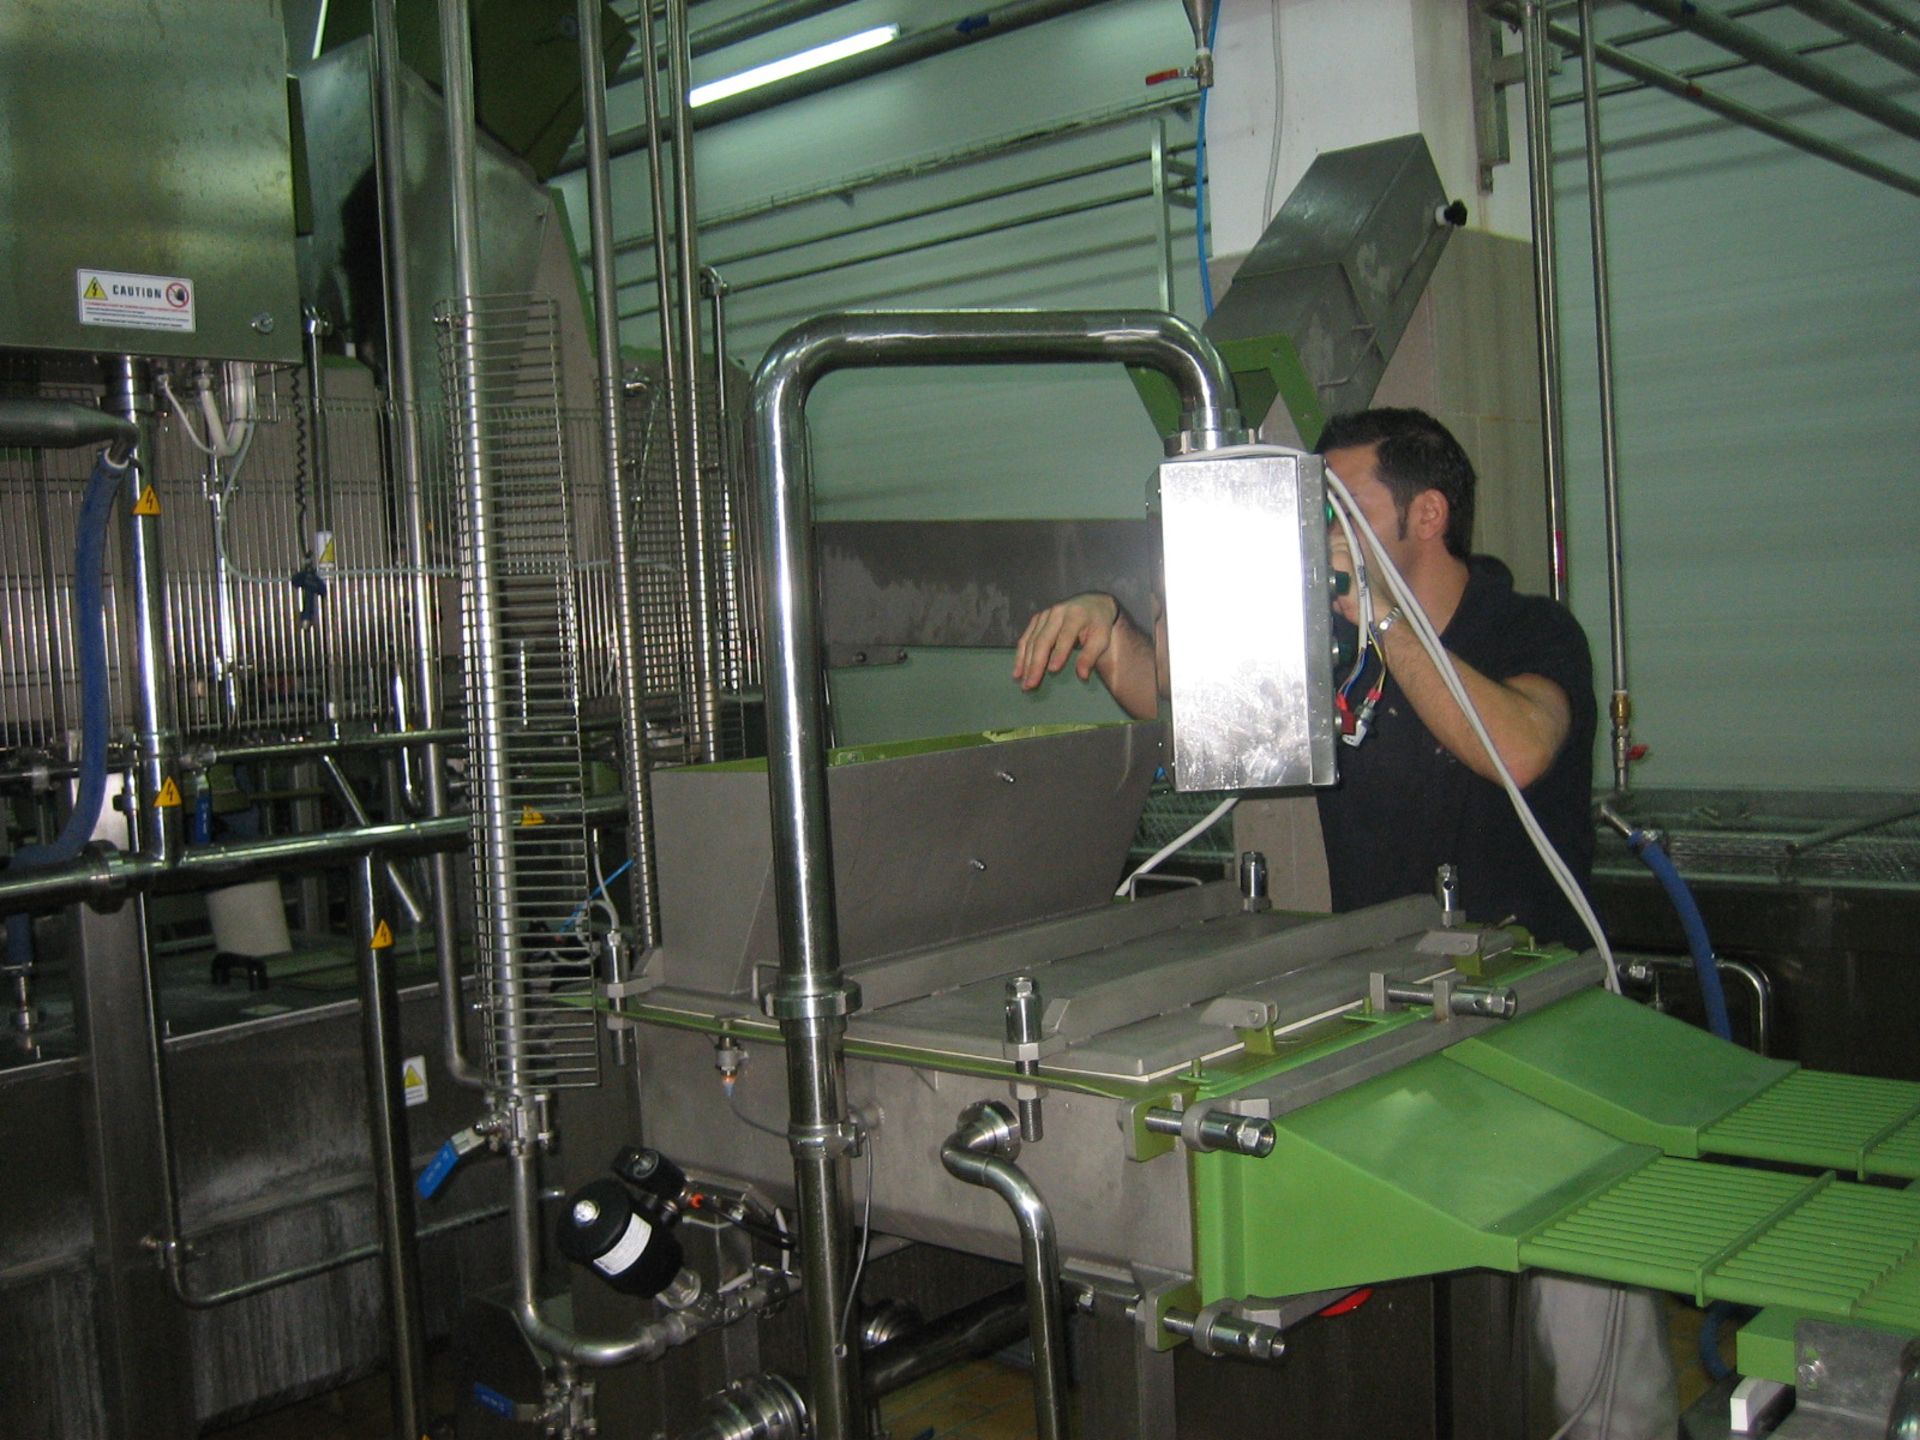 2X COMAT PROCESSING LINES FOR MOZZARELLA CHEESE TO PRODUCE MOZZARELLA STICKS AND MOZZARELLA BLOCKS - Image 8 of 11